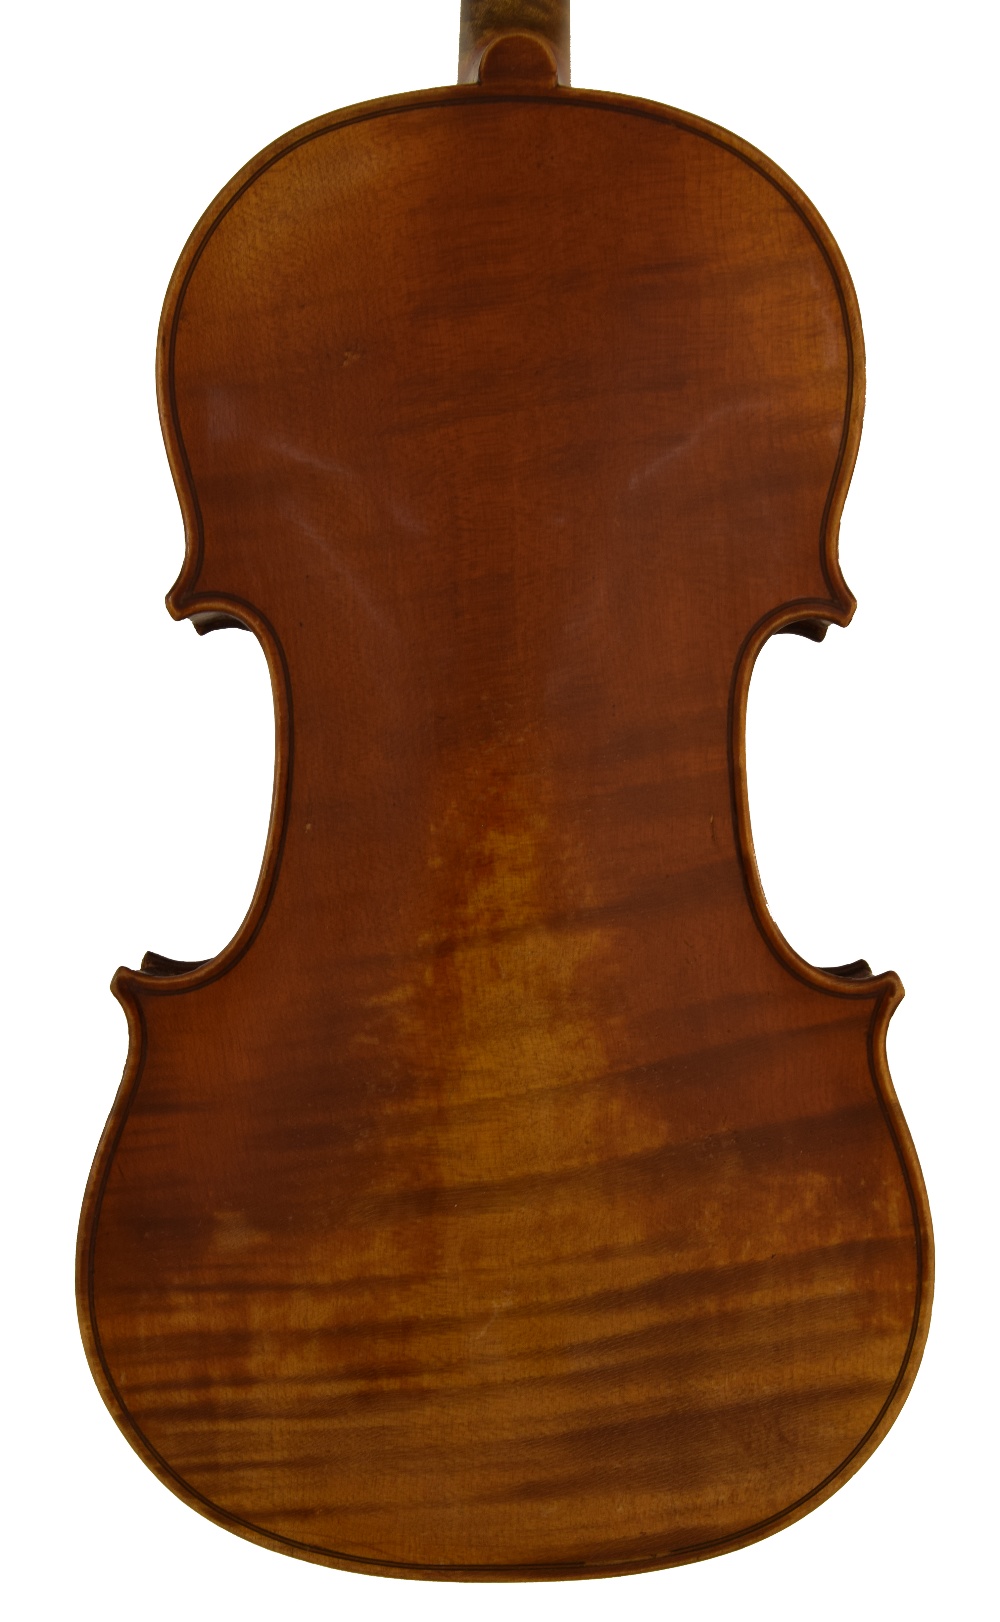 French violin labelled Jt. Derazey Luthier, Mirecourt Vosges, Hors, Concours..., also stamped Jt. - Image 2 of 3